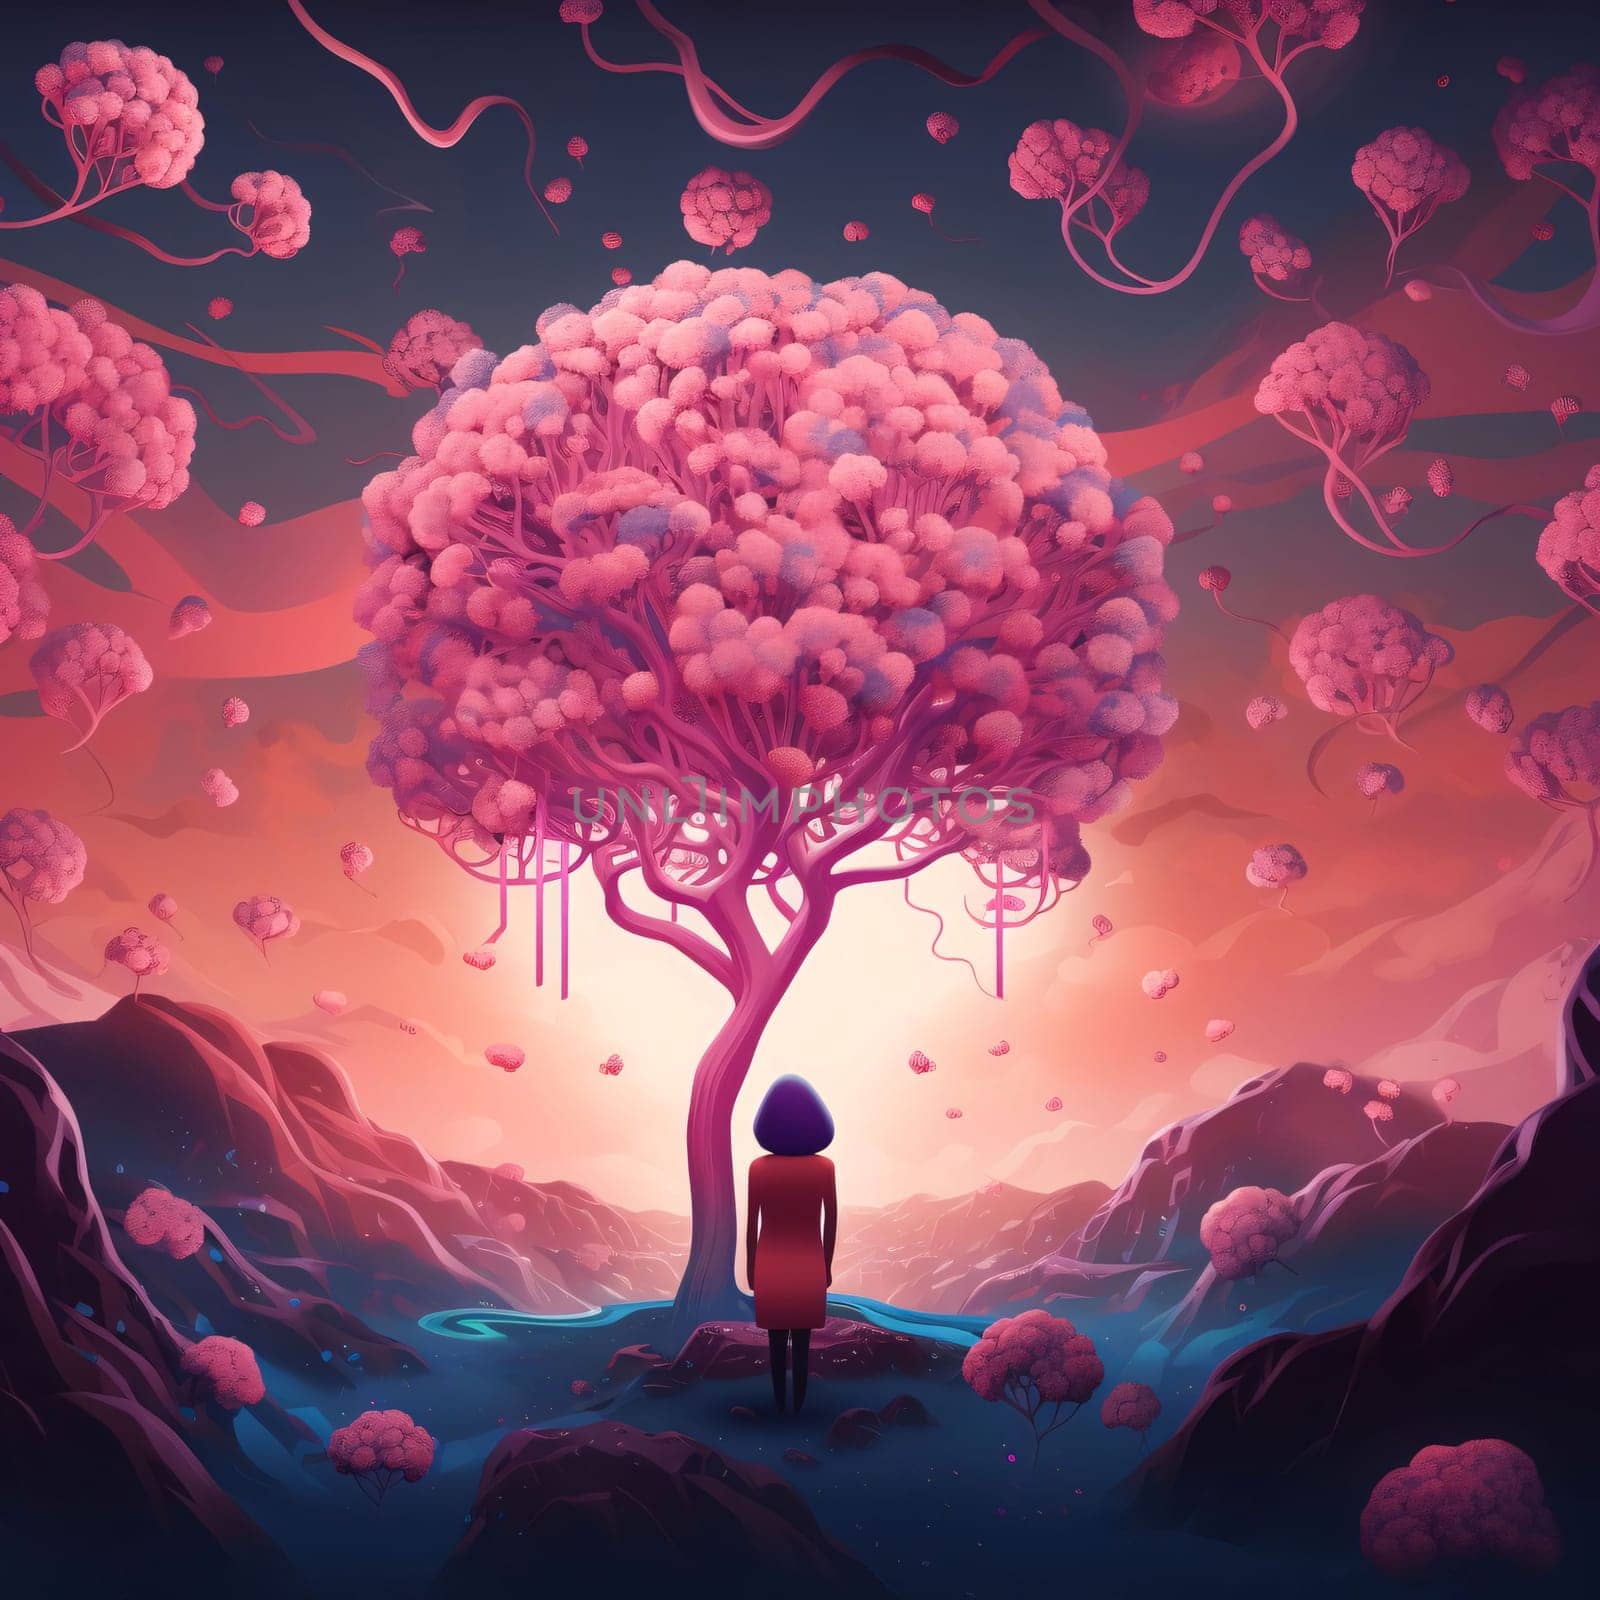 Lonely woman under a pink tree illustration. World cancer day. A day to celebrate victory.